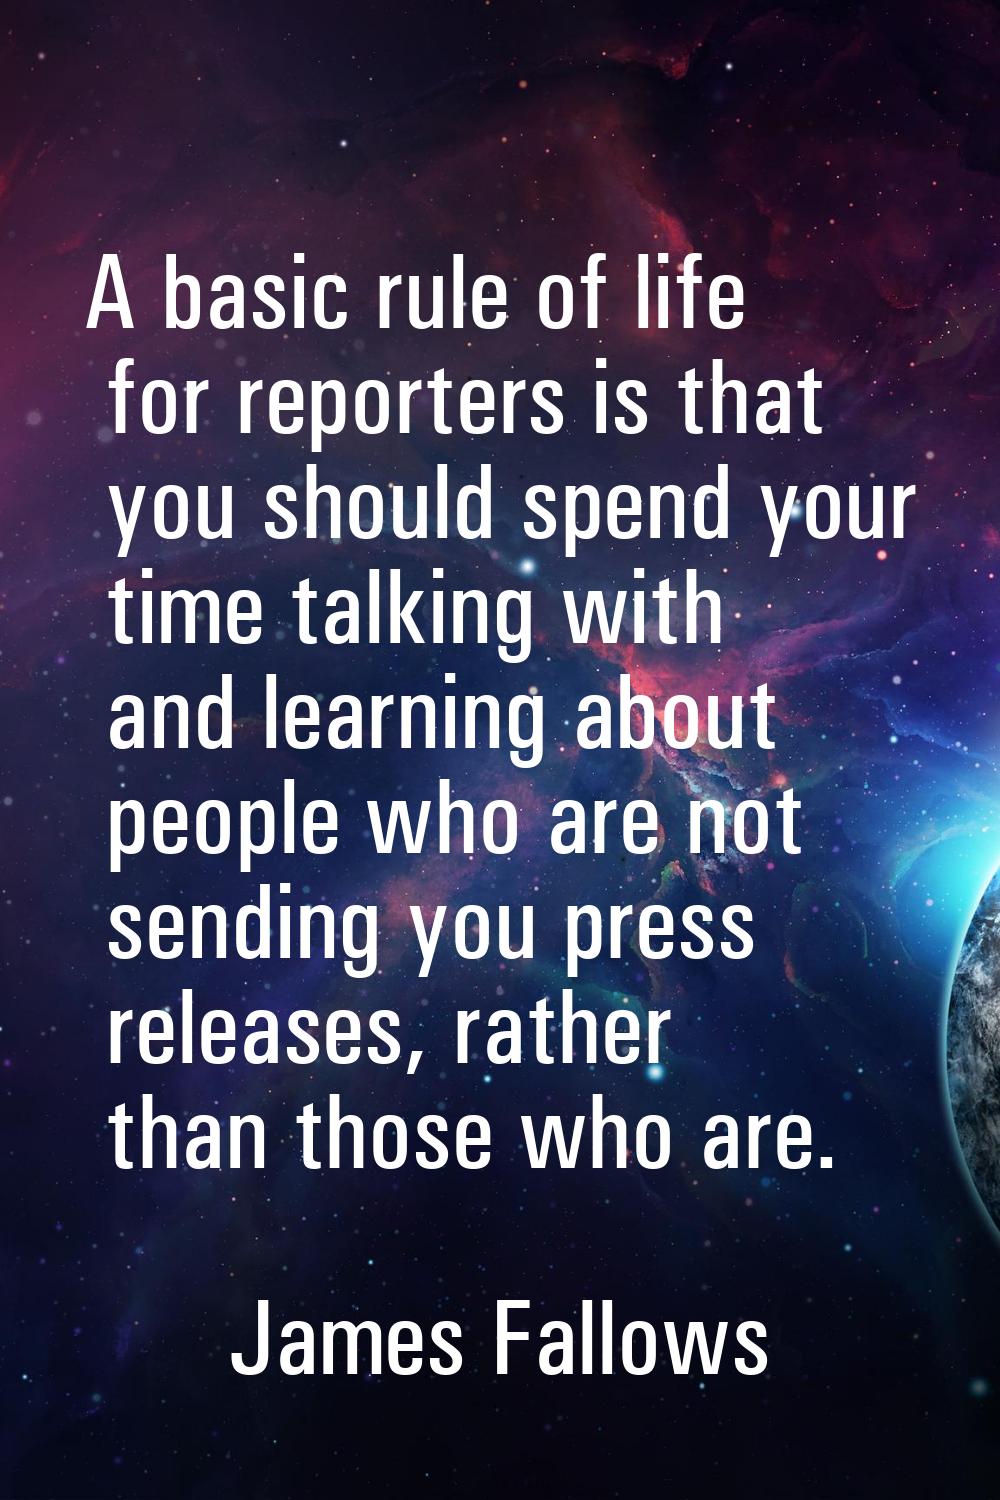 A basic rule of life for reporters is that you should spend your time talking with and learning abo